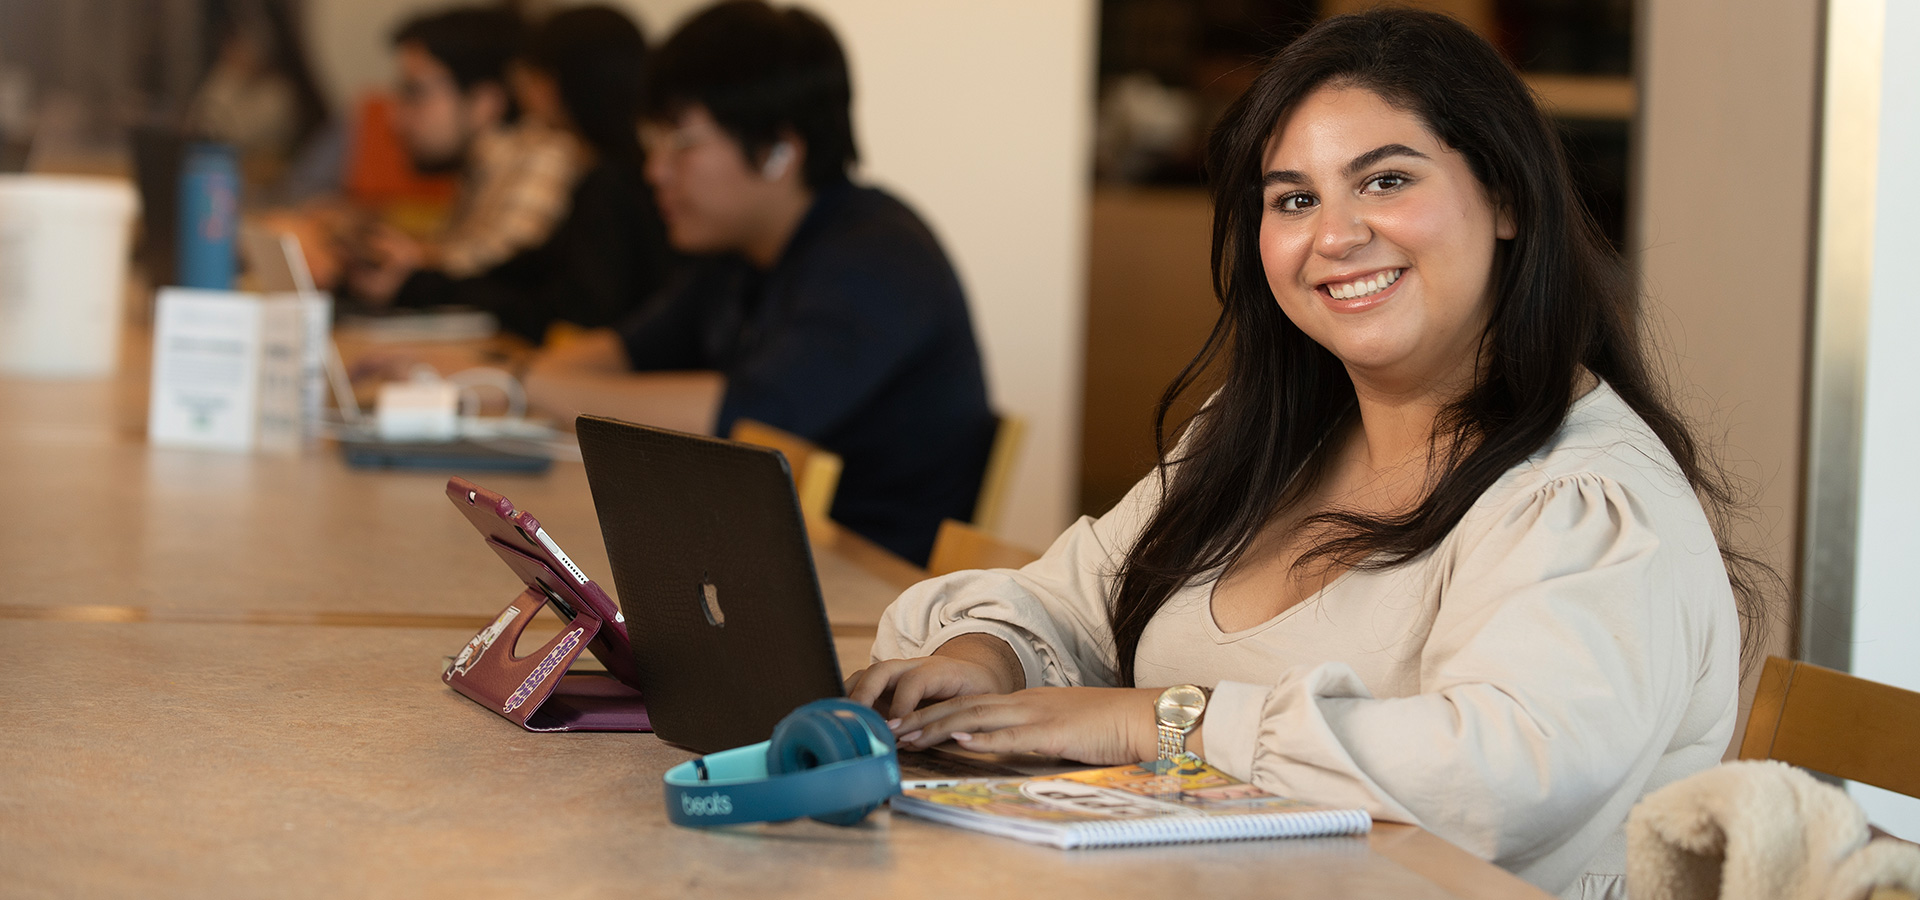 Female student sits at a table with her laptop and smiles.